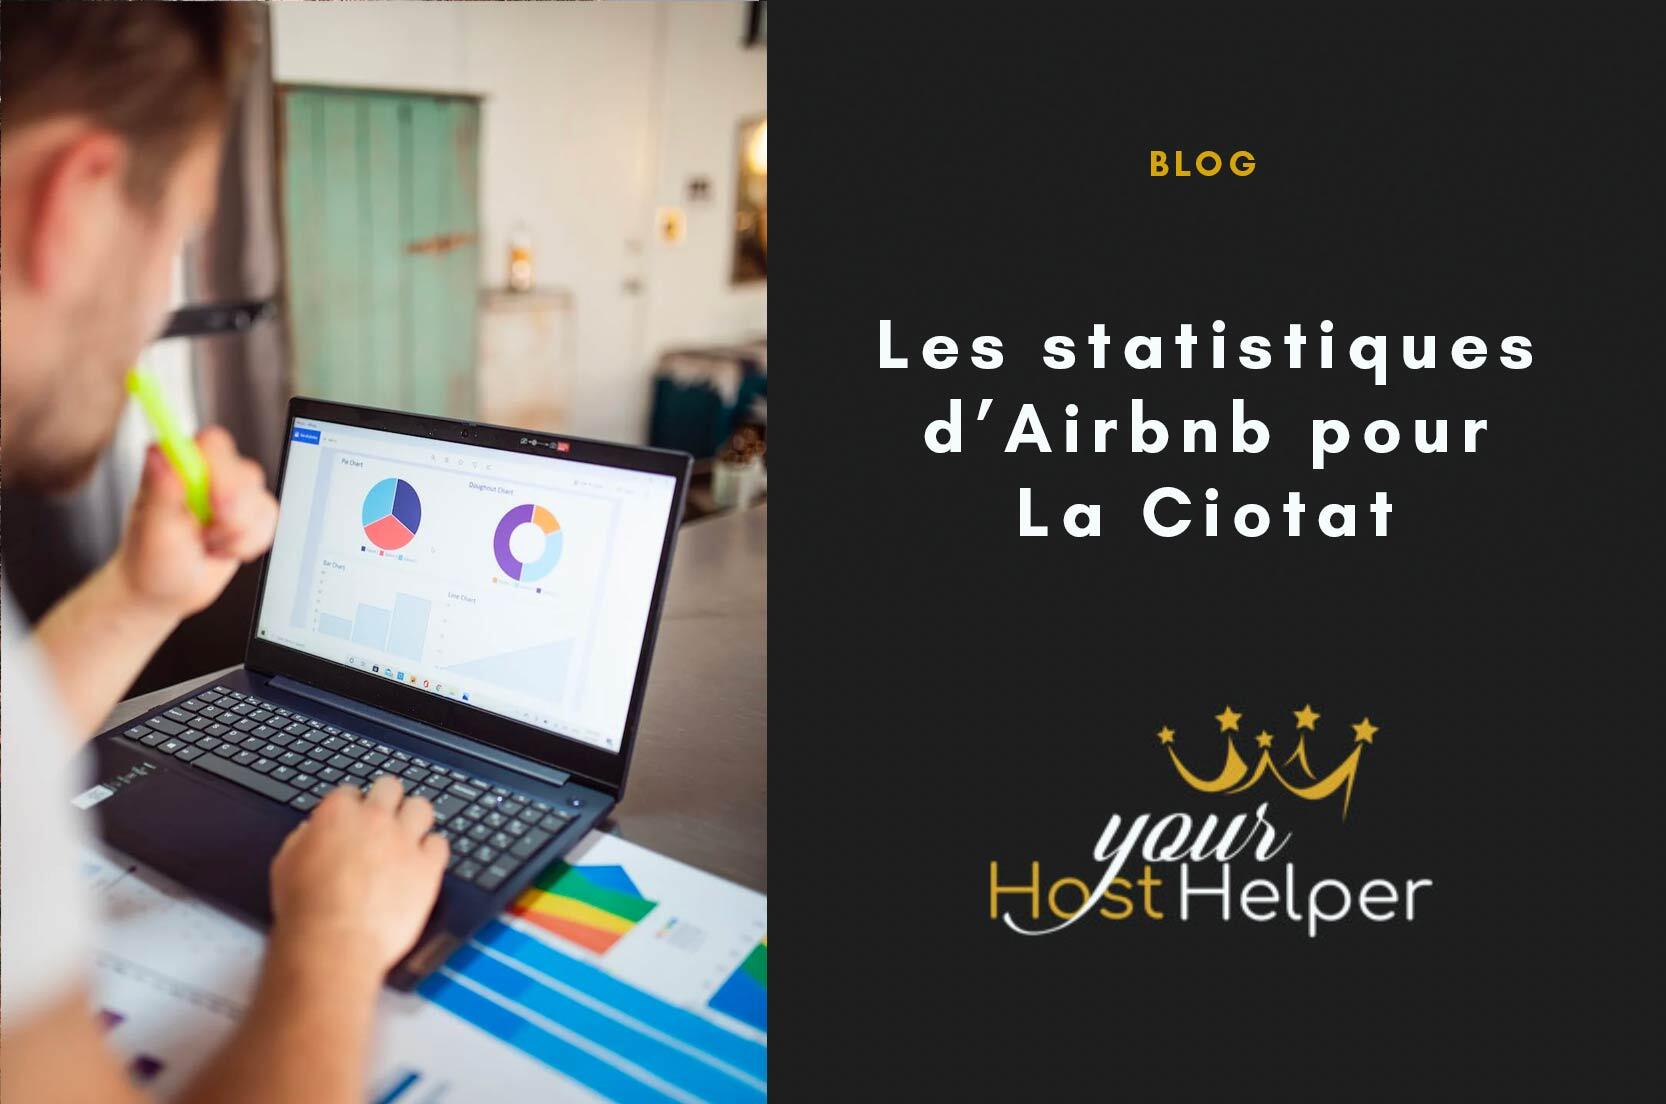 You are currently viewing La Ciotat Airbnb statistics detailed by our concierge